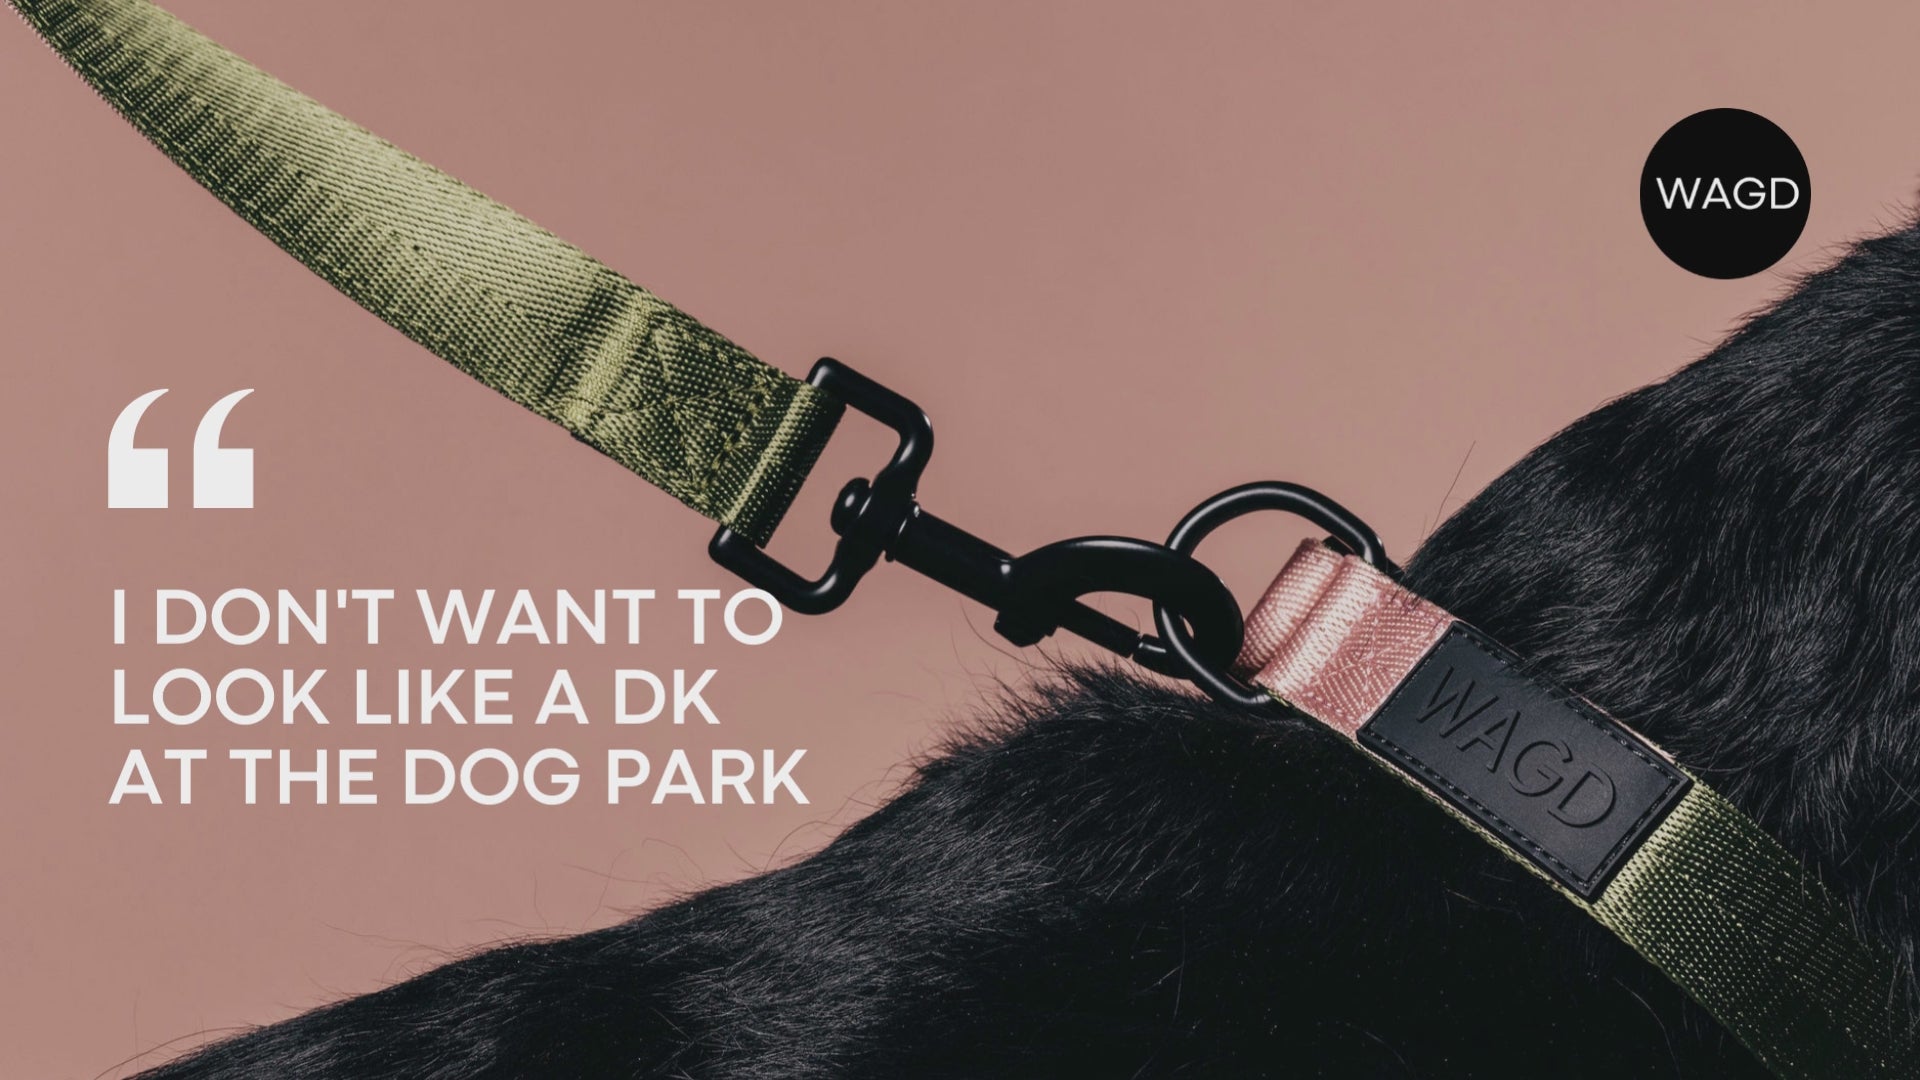 Load video: Video with 10 changing images of dog necks with collars on. The text says I don&#39;t want to look like a dk at the dog park&quot;. Video ends with a black circle with white writing and text WAGD.